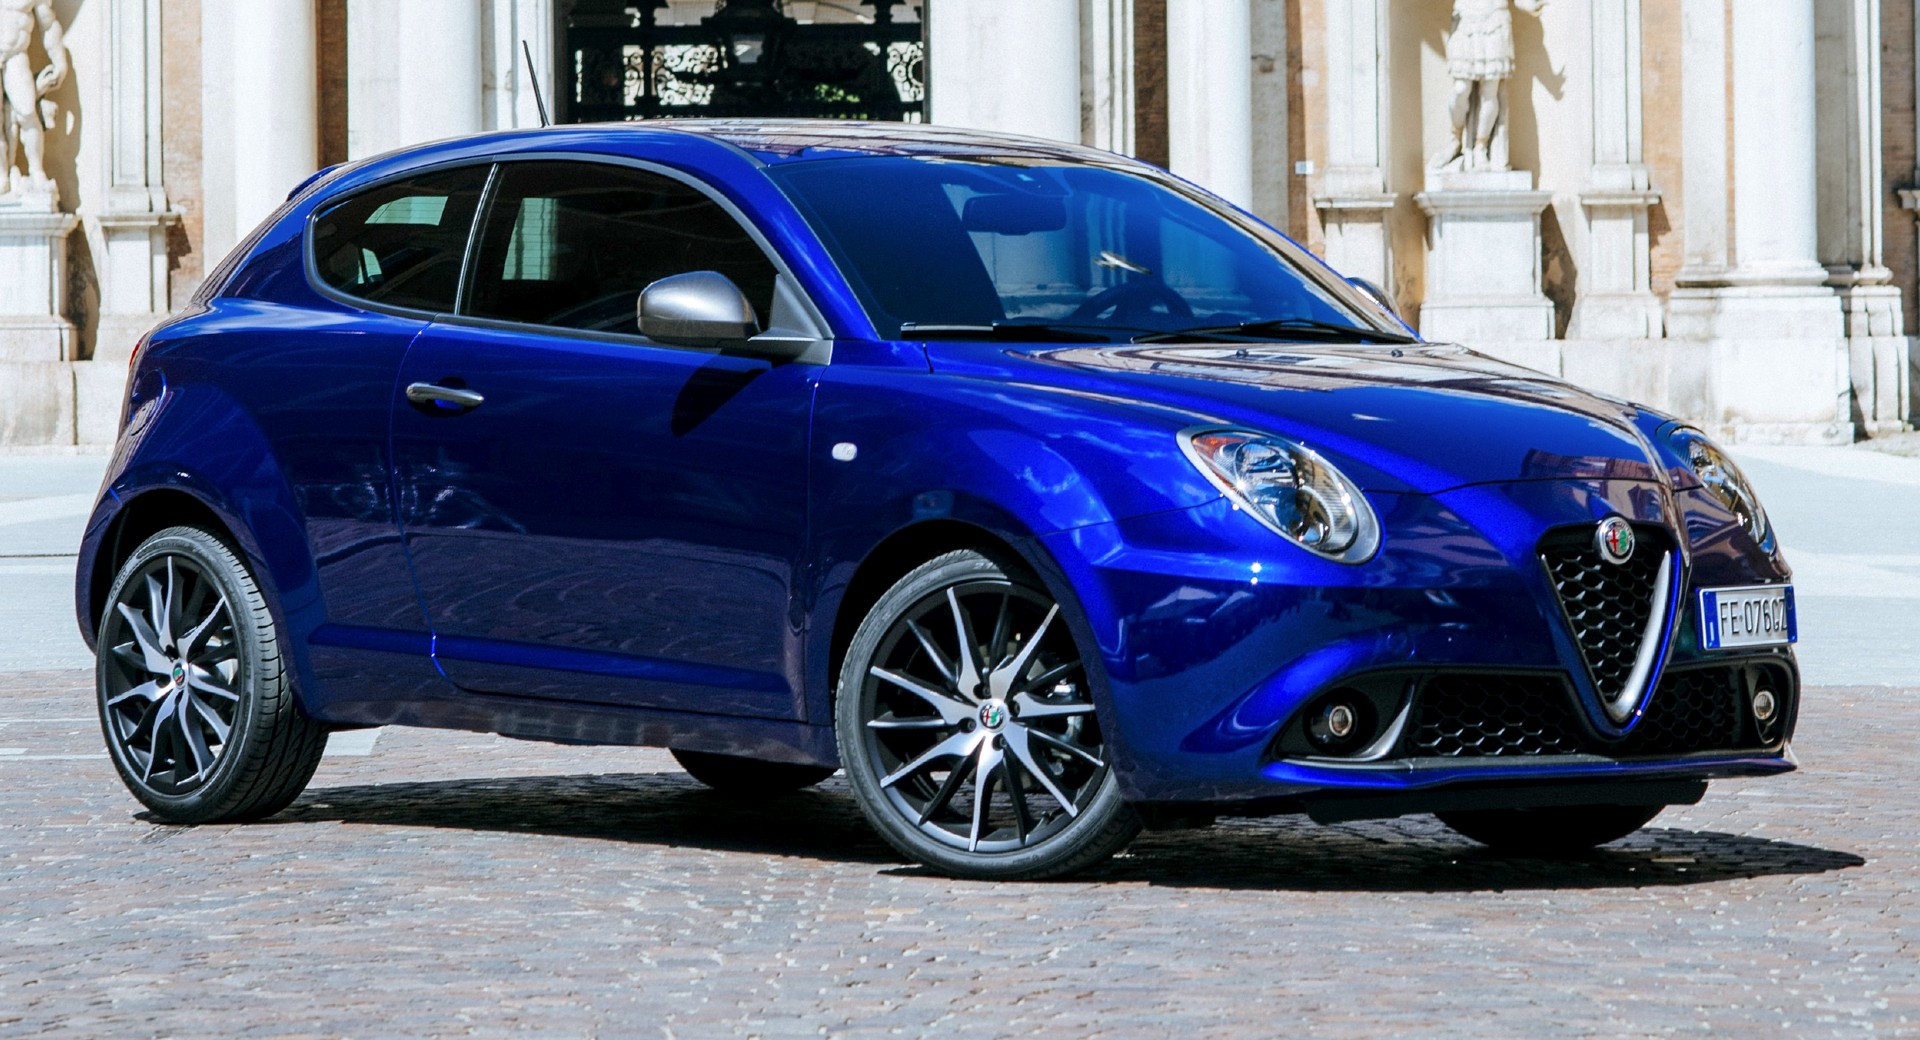 Alfa: MiTo might be too small for U.S. - CNET